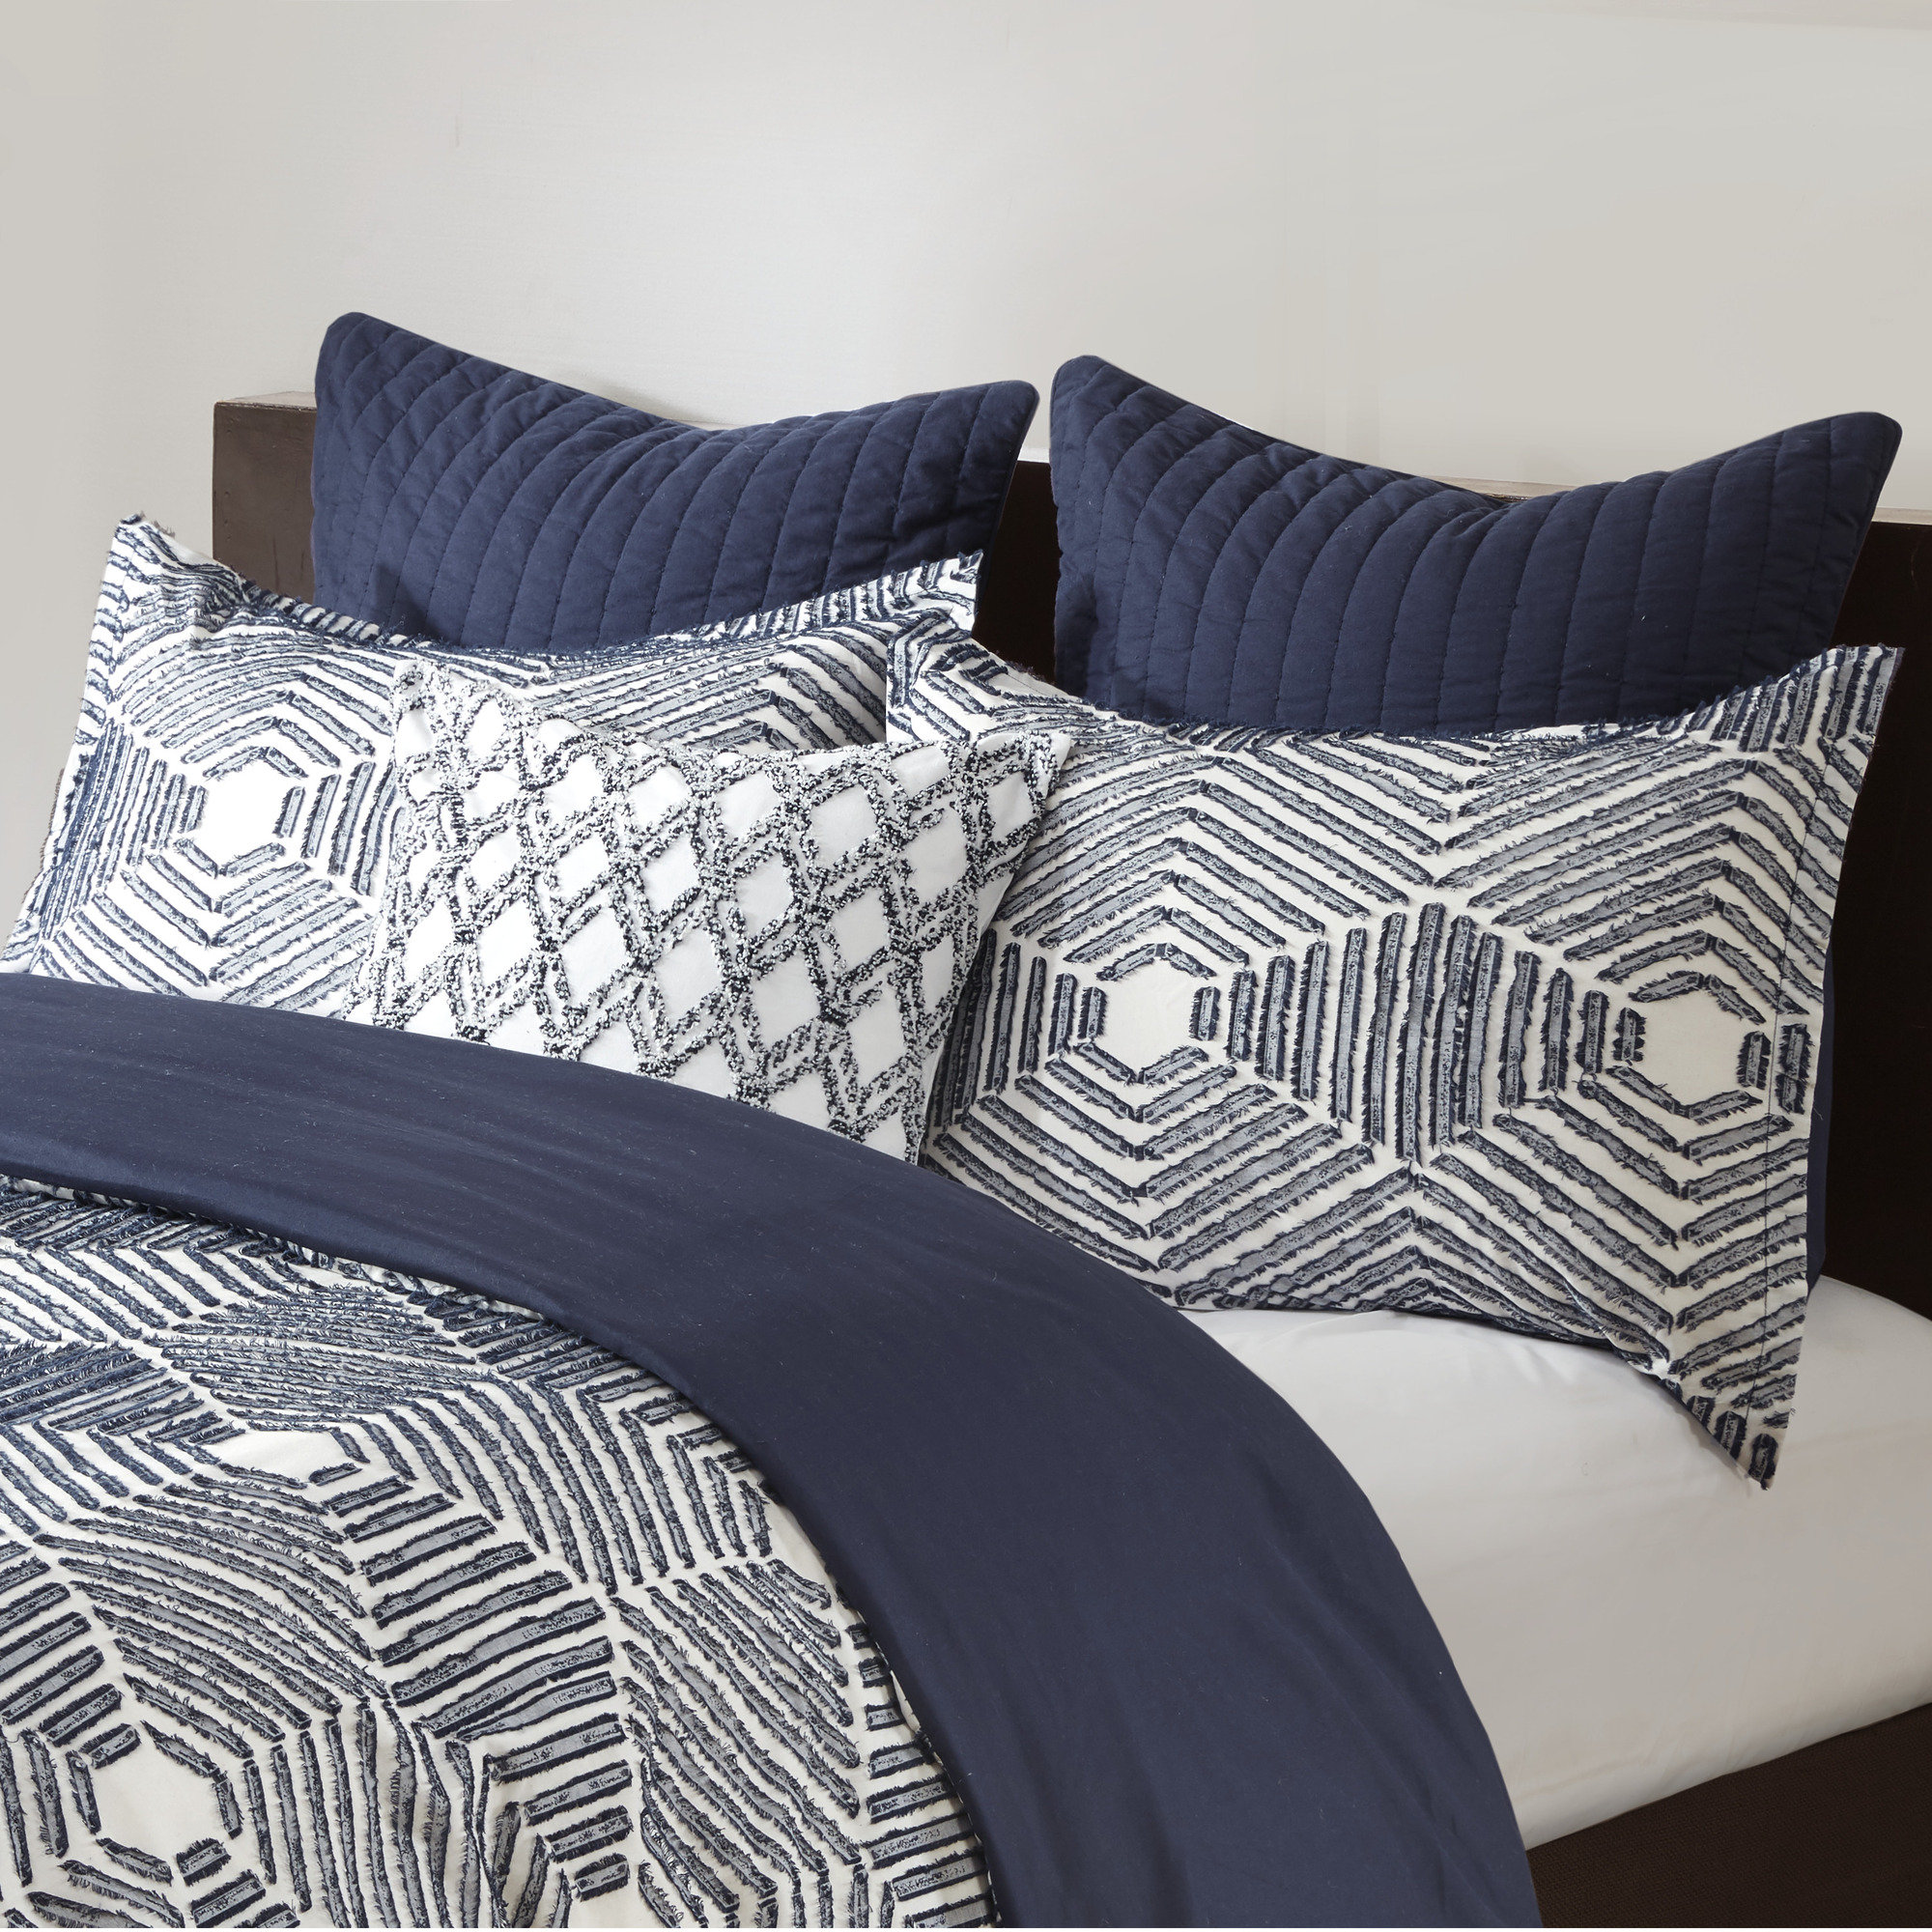 Modern Rustic Interiors Duvet Covers Sets You Ll Love In 2019